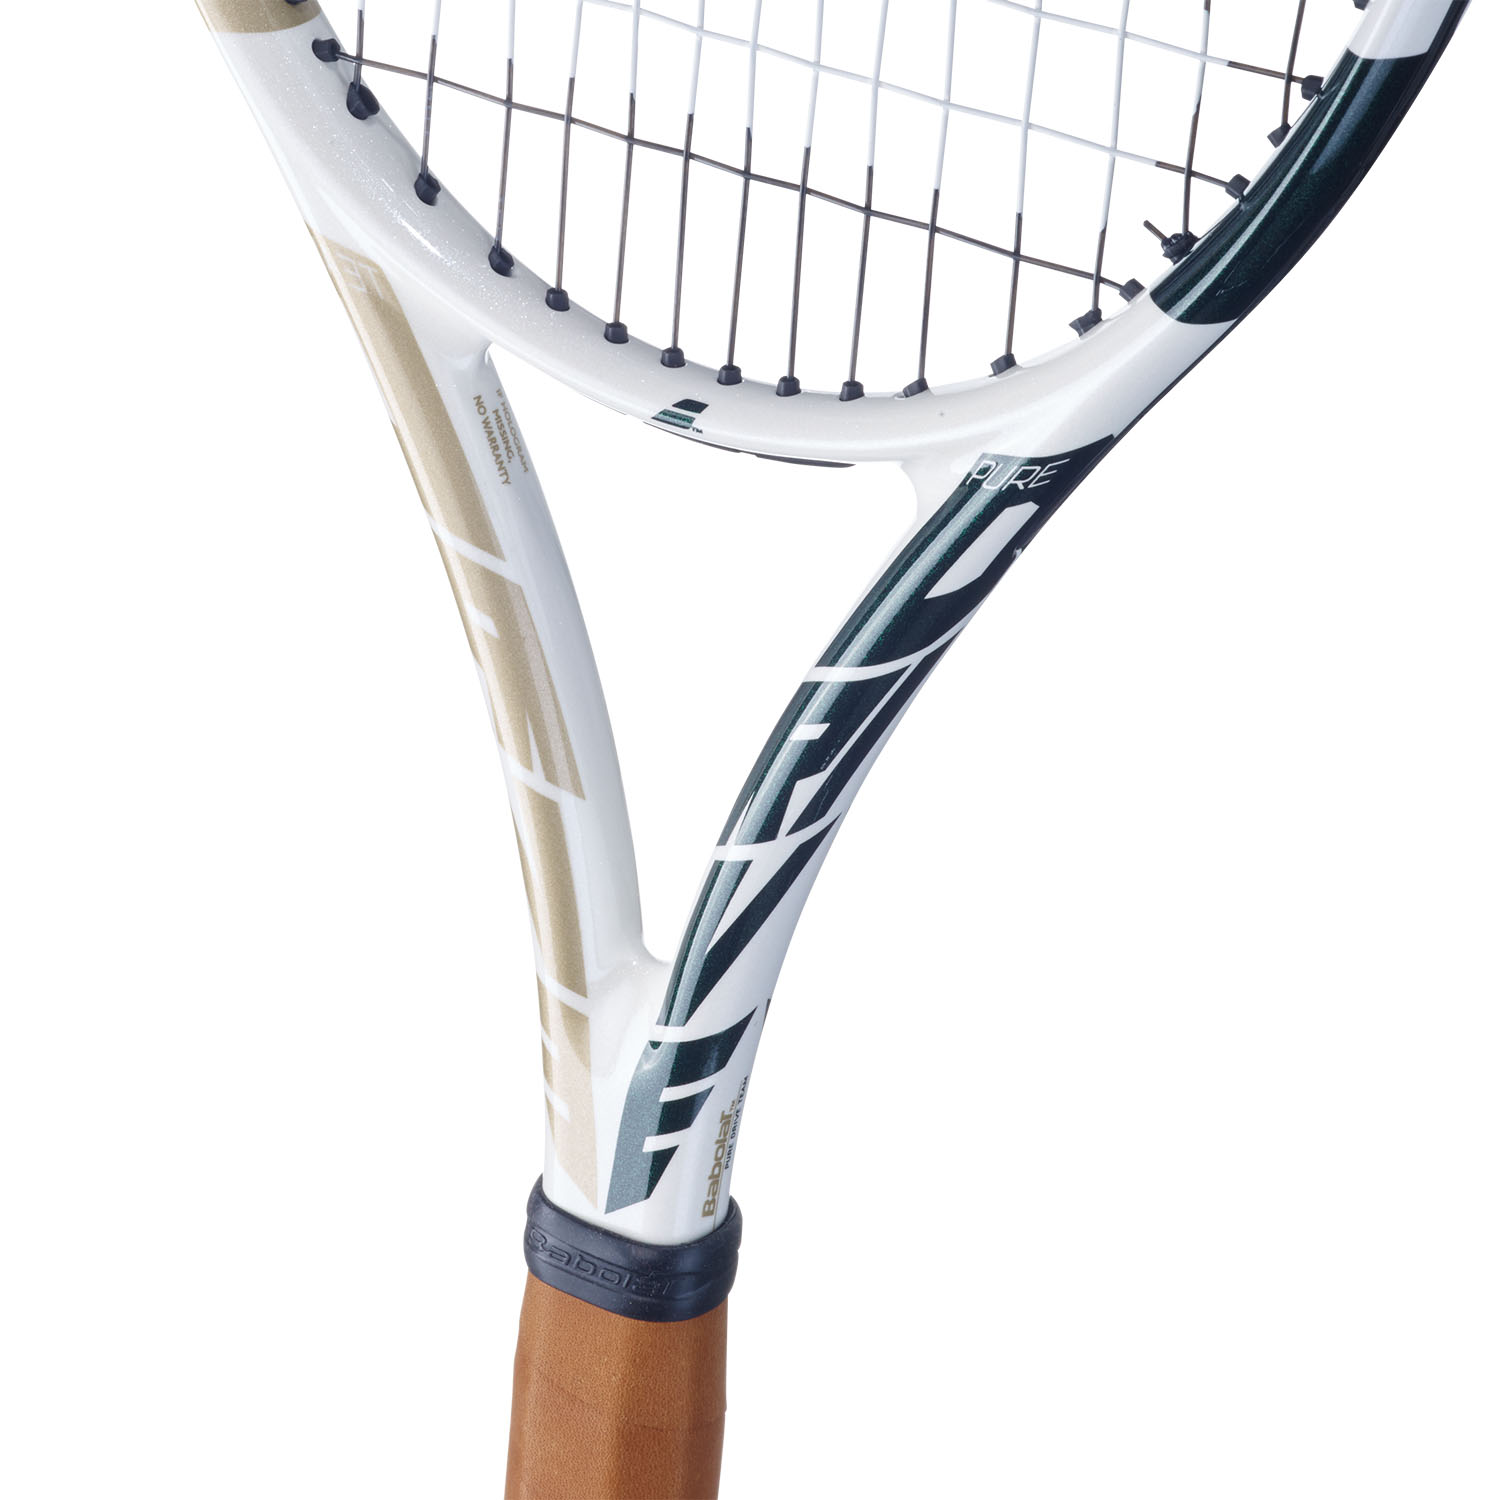 CLEARANCE SPECIAL Babolat Drive Max 105 Tennis Racket RRP £199 